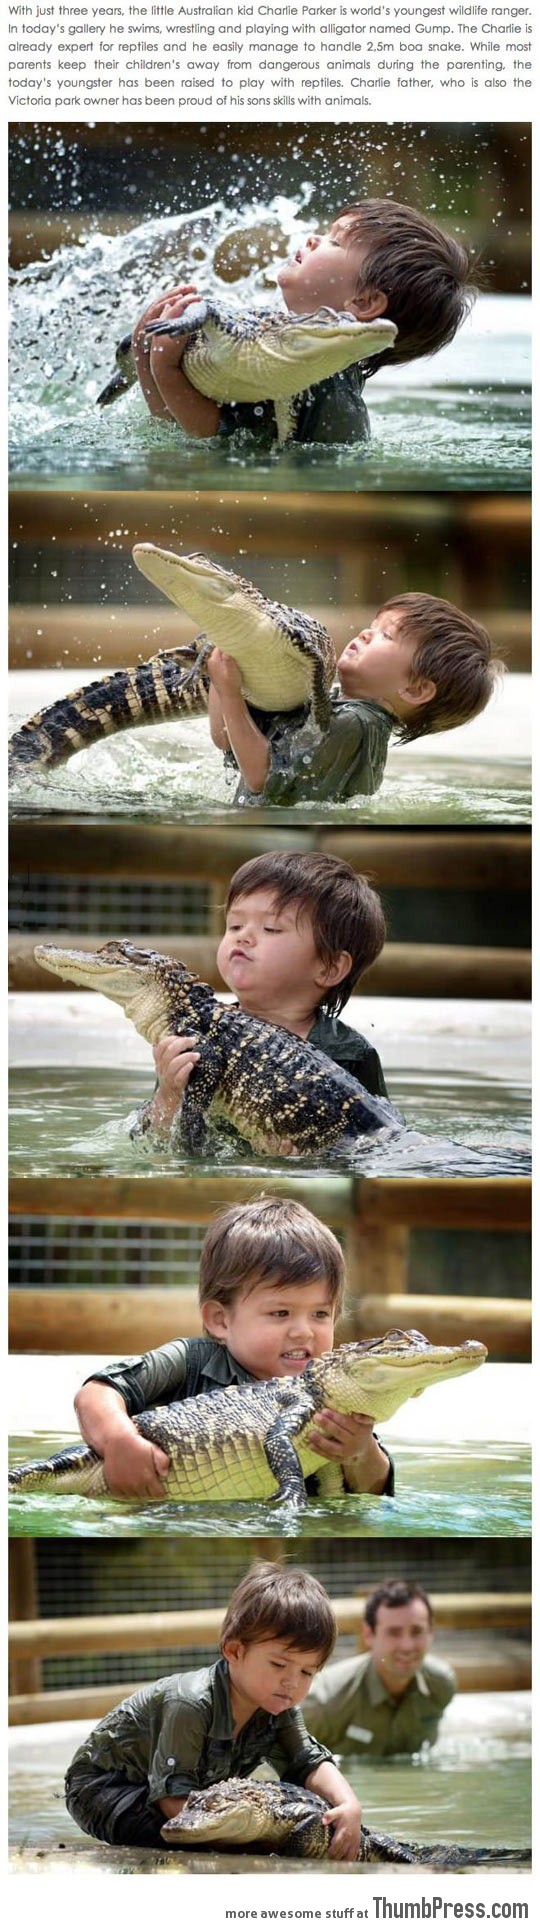 This generation needs a new Steve Irwin…